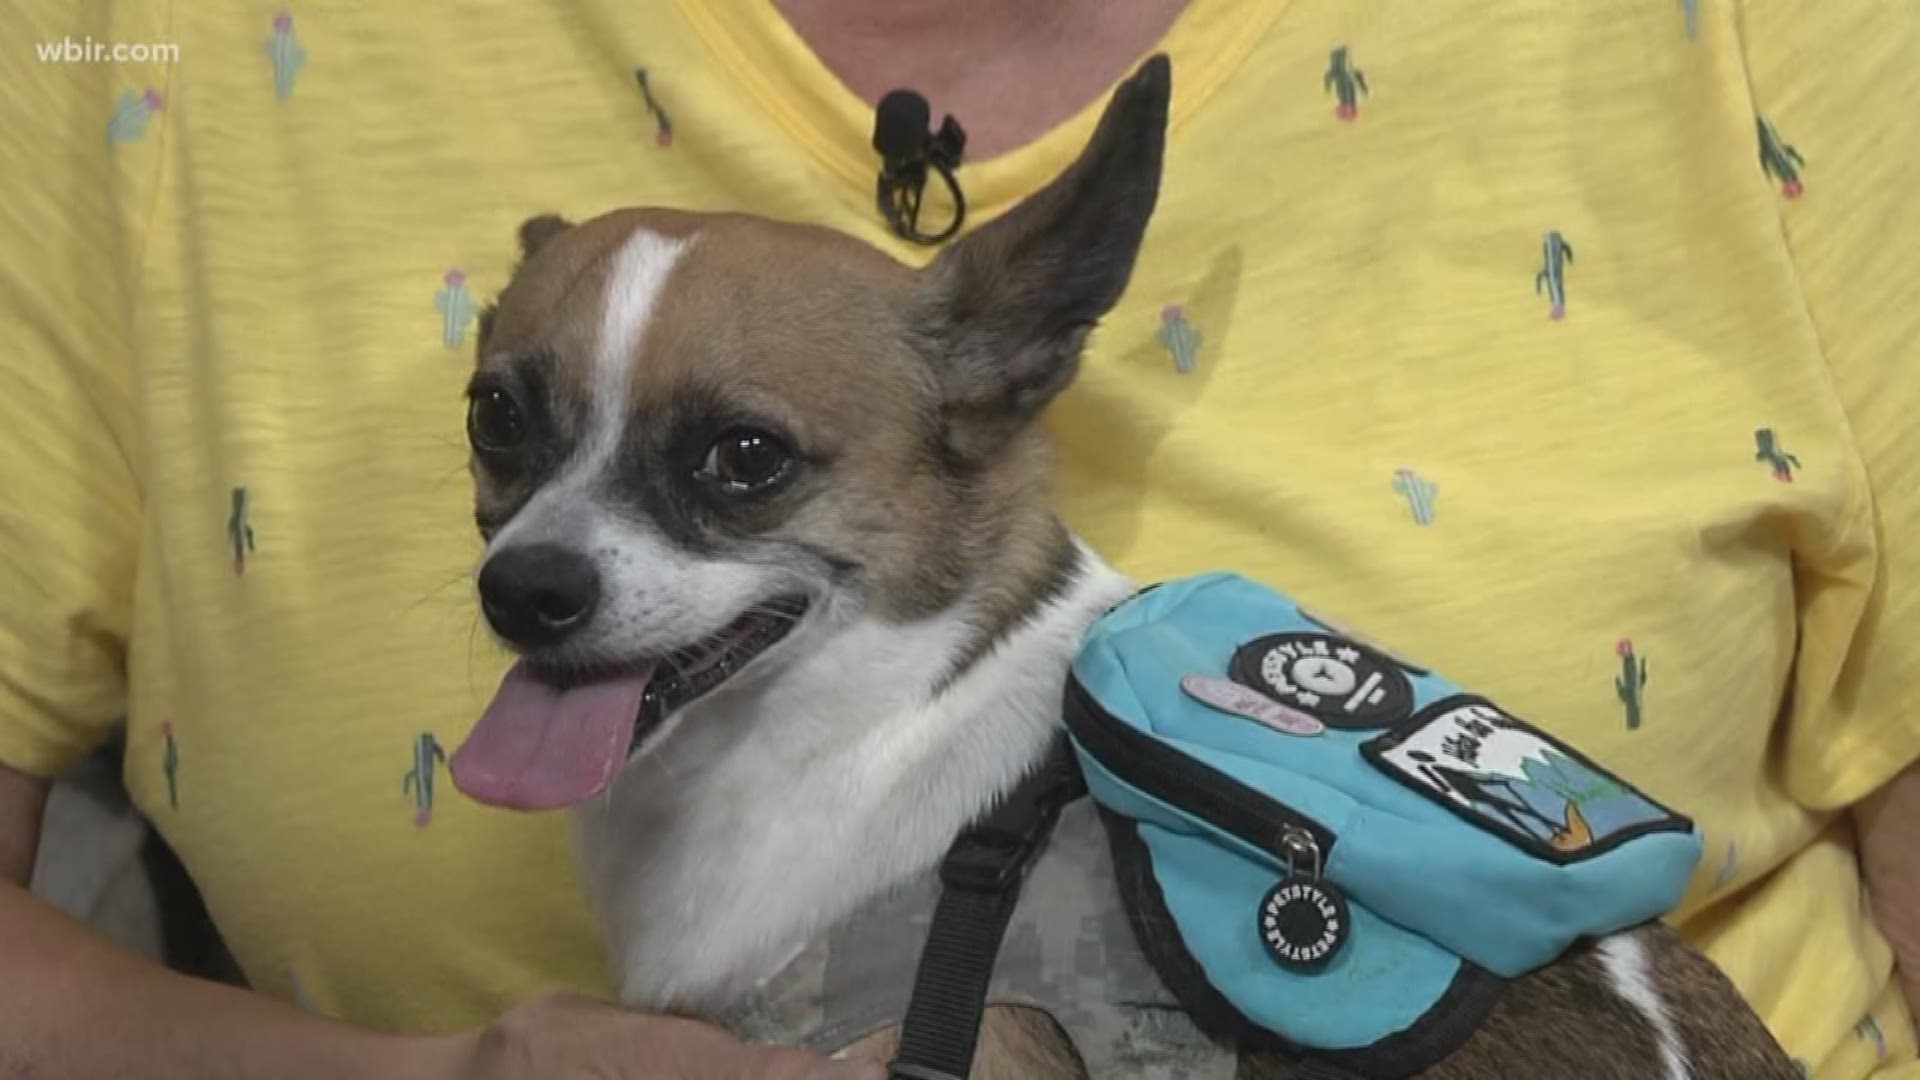 Major the dog received a pin for hiking 50 miles in the Great Smoky Mountains National Park. Dogs are only allowed on 2 trails in the Smokies (Gatlinburg Trail and the Oconoluftee Trail in Cherokee, North Carolina). Major and owner  Shirley Henshall visited Live at Five at Four. June 26, 2019-4pm.